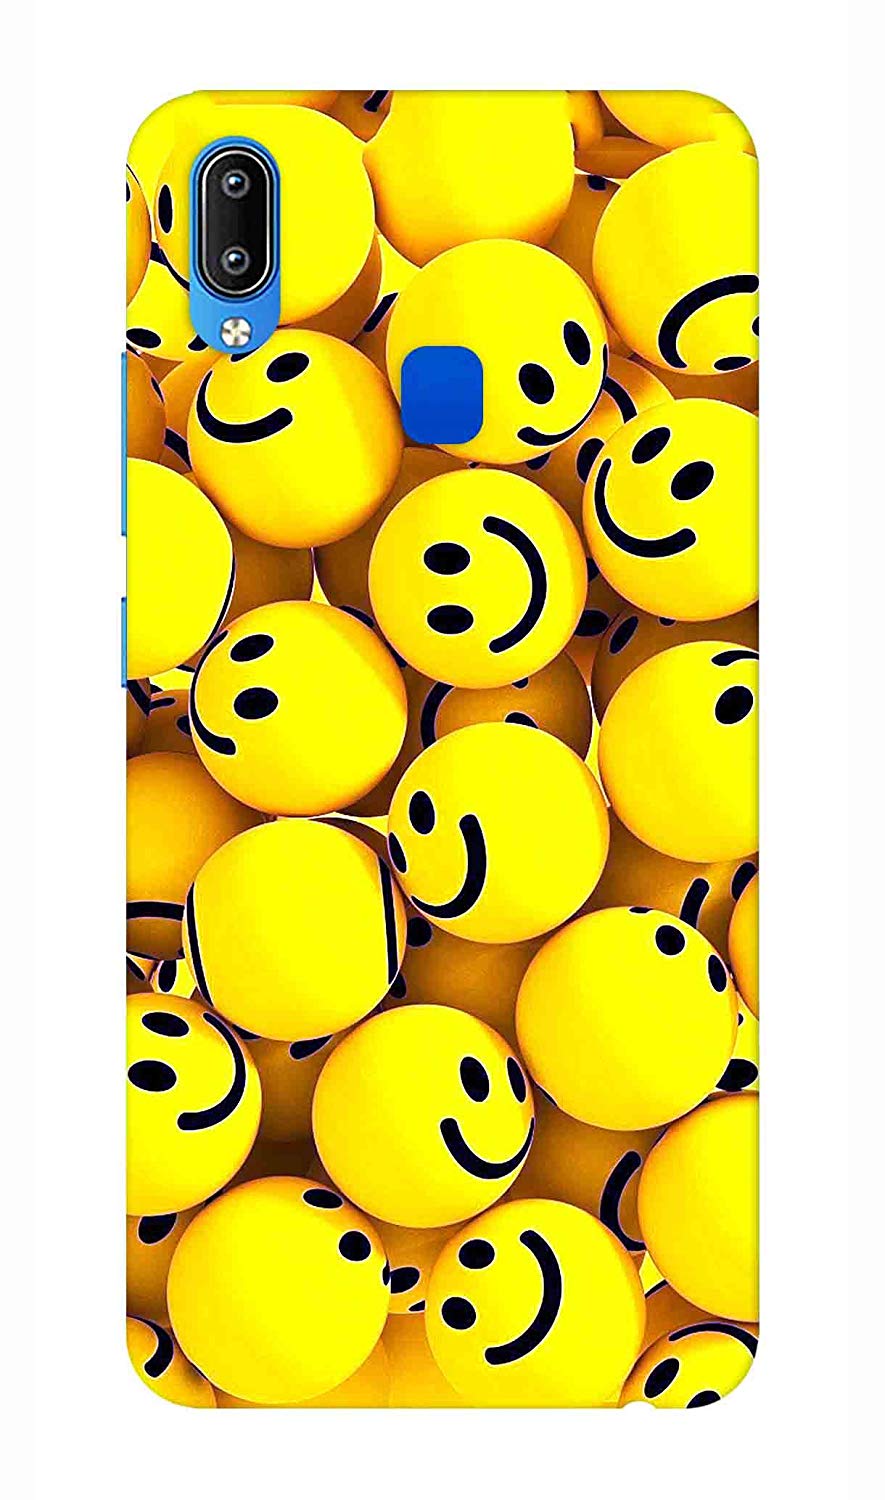 3d Smiley Wallpapers For Mobile - 885x1500 Wallpaper 